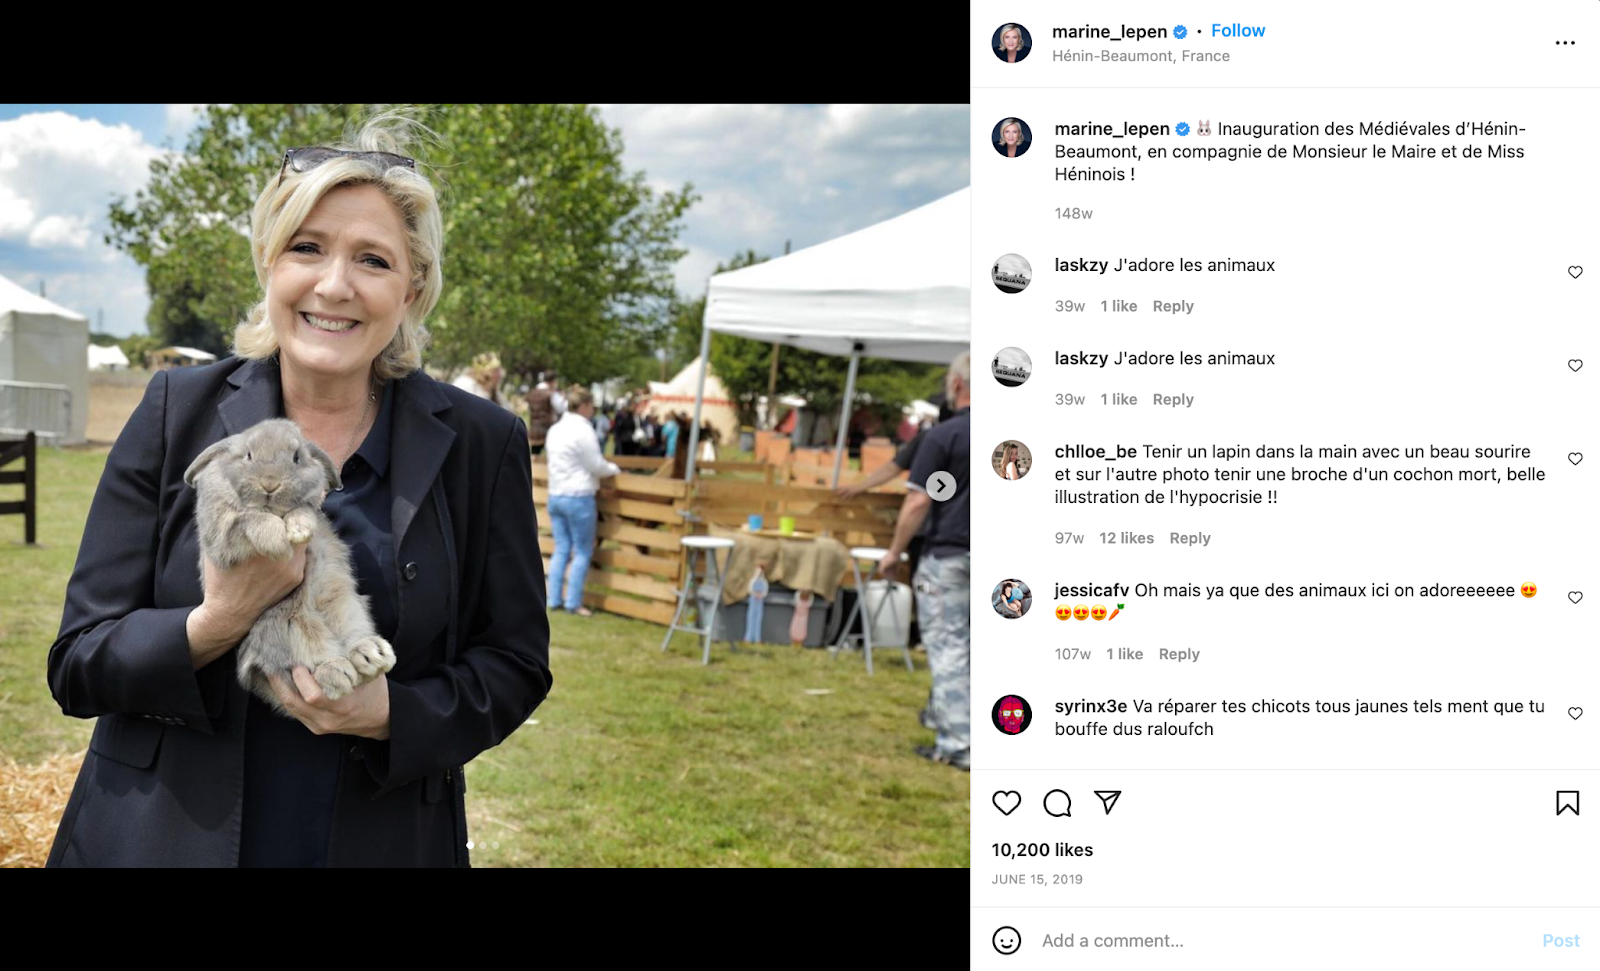 Marine Le Pen holds a rabbit while smiling